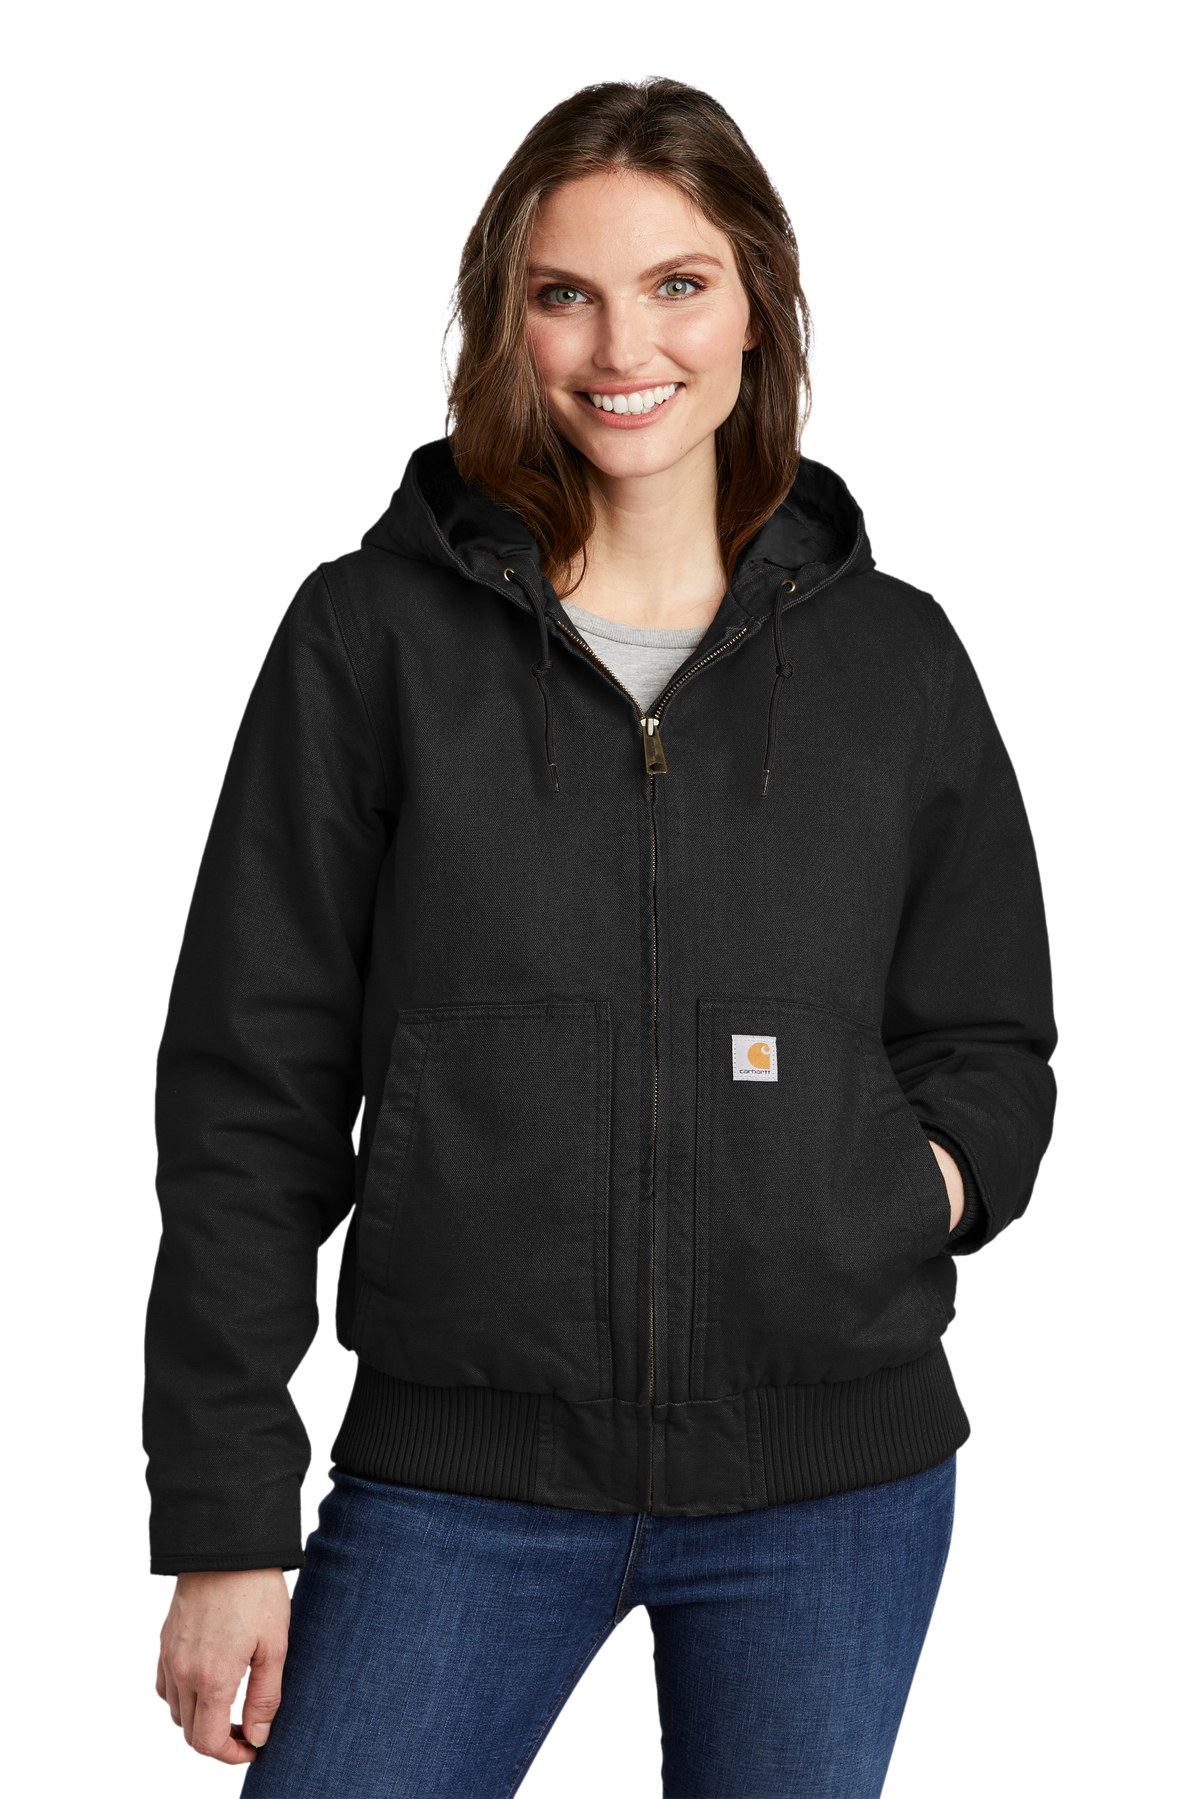 Carhartt Embroidered Women's Washed Duck Active Jacket - Queensboro